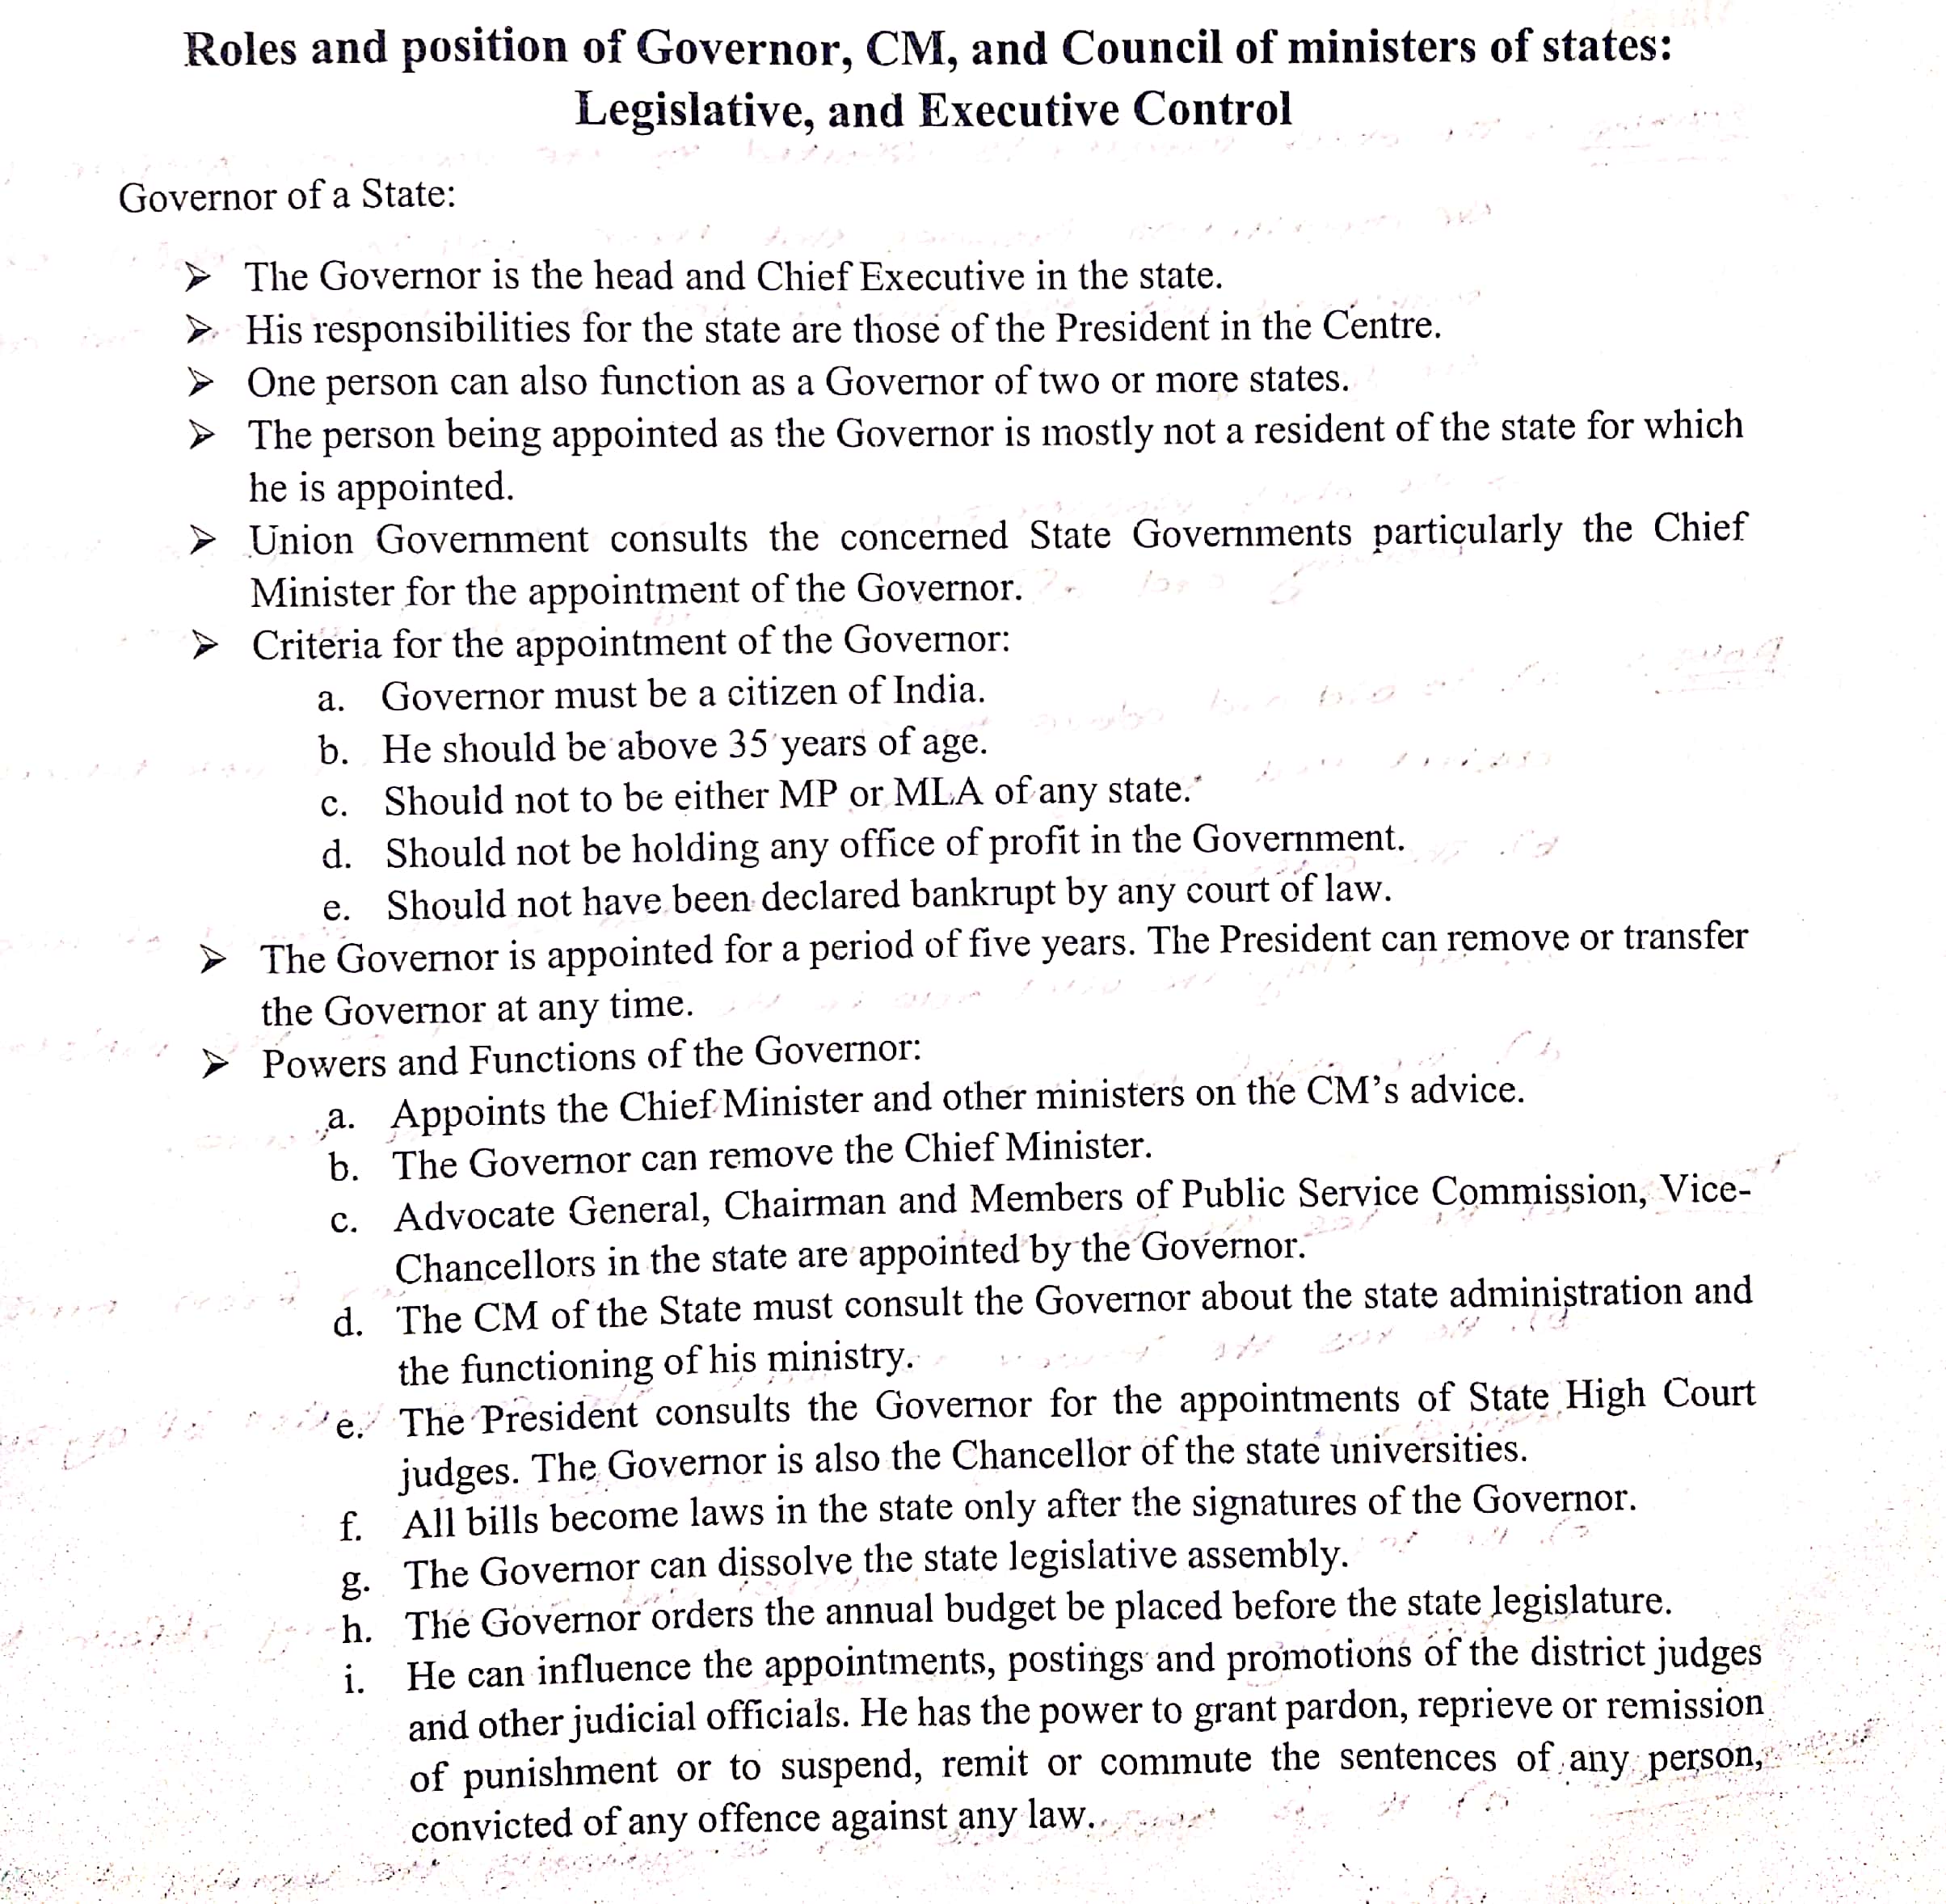 List of the Responsibilities given to a governor , Chief Minster and Council of Minsters of statea-New Doc 2019-10-17 14.41.46_4.jpg